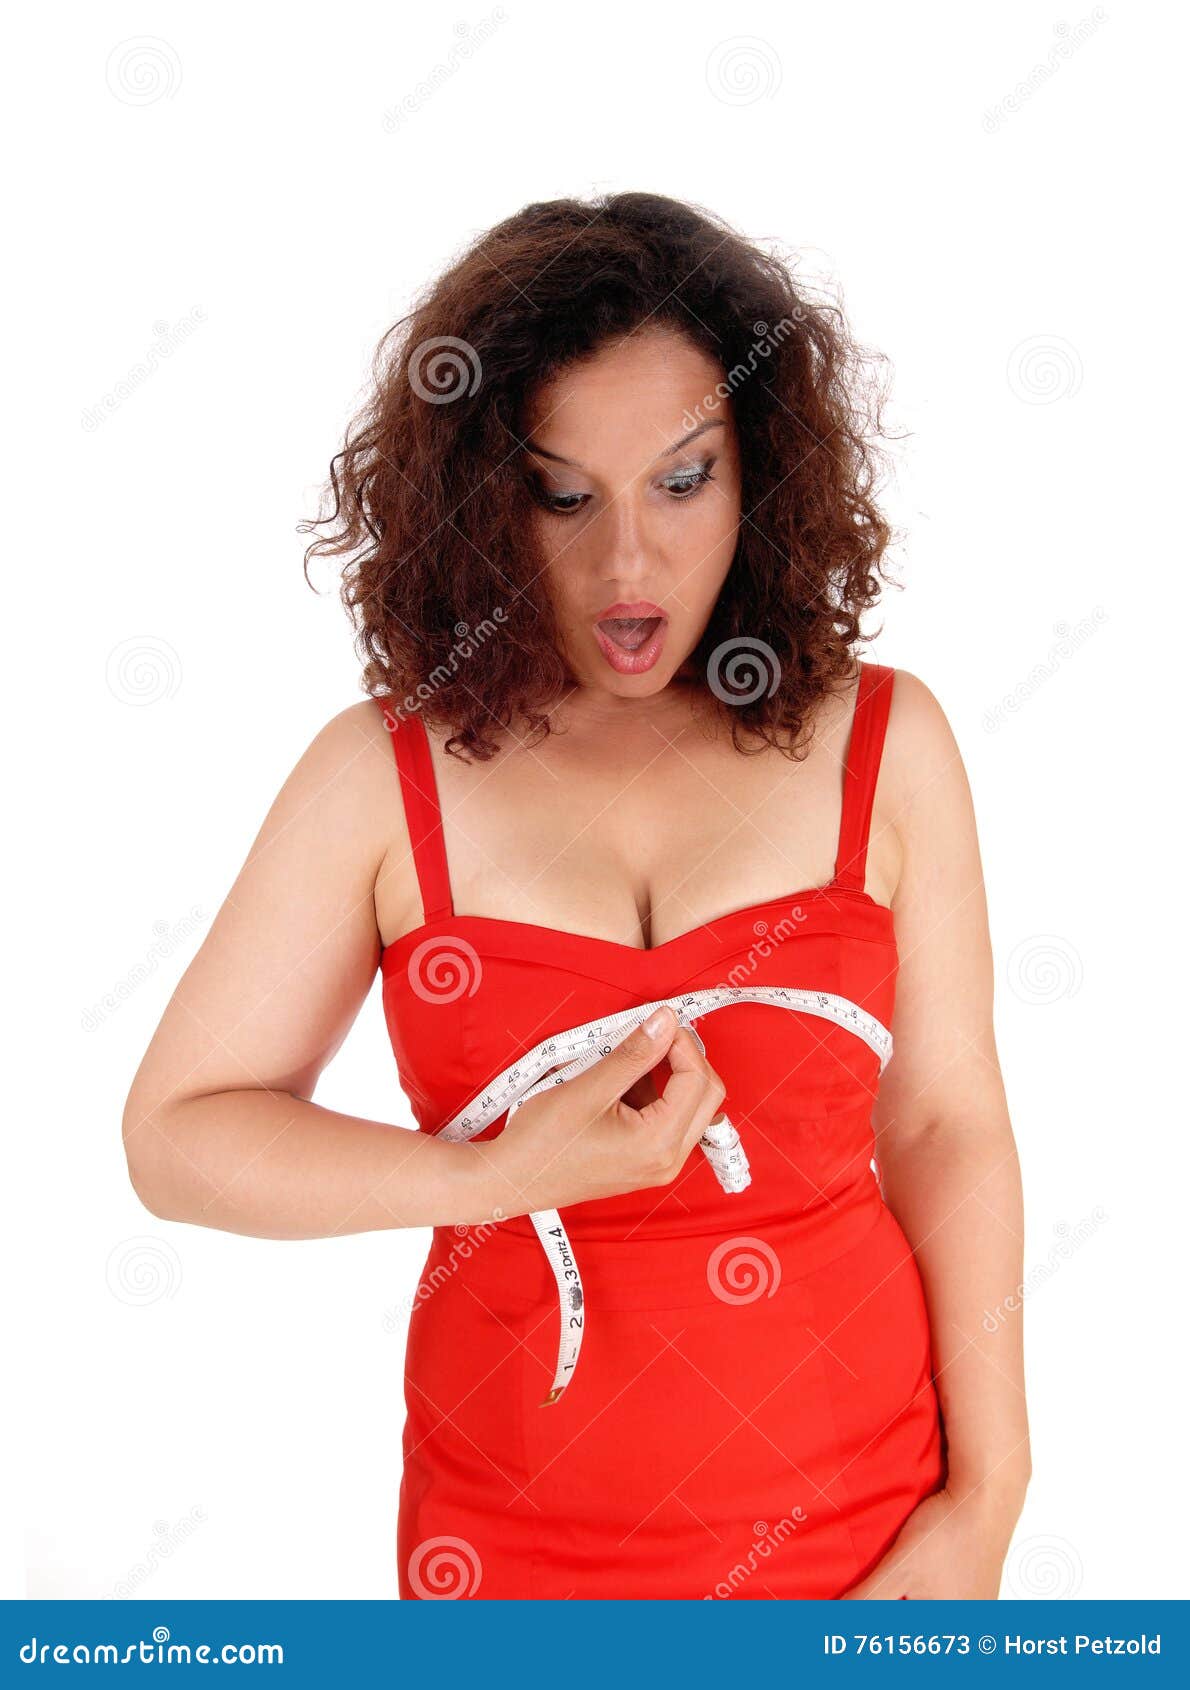 https://thumbs.dreamstime.com/z/woman-messaging-her-breast-lovely-young-standing-s-red-dress-measuring-breasts-very-surprised-isolated-white-76156673.jpg